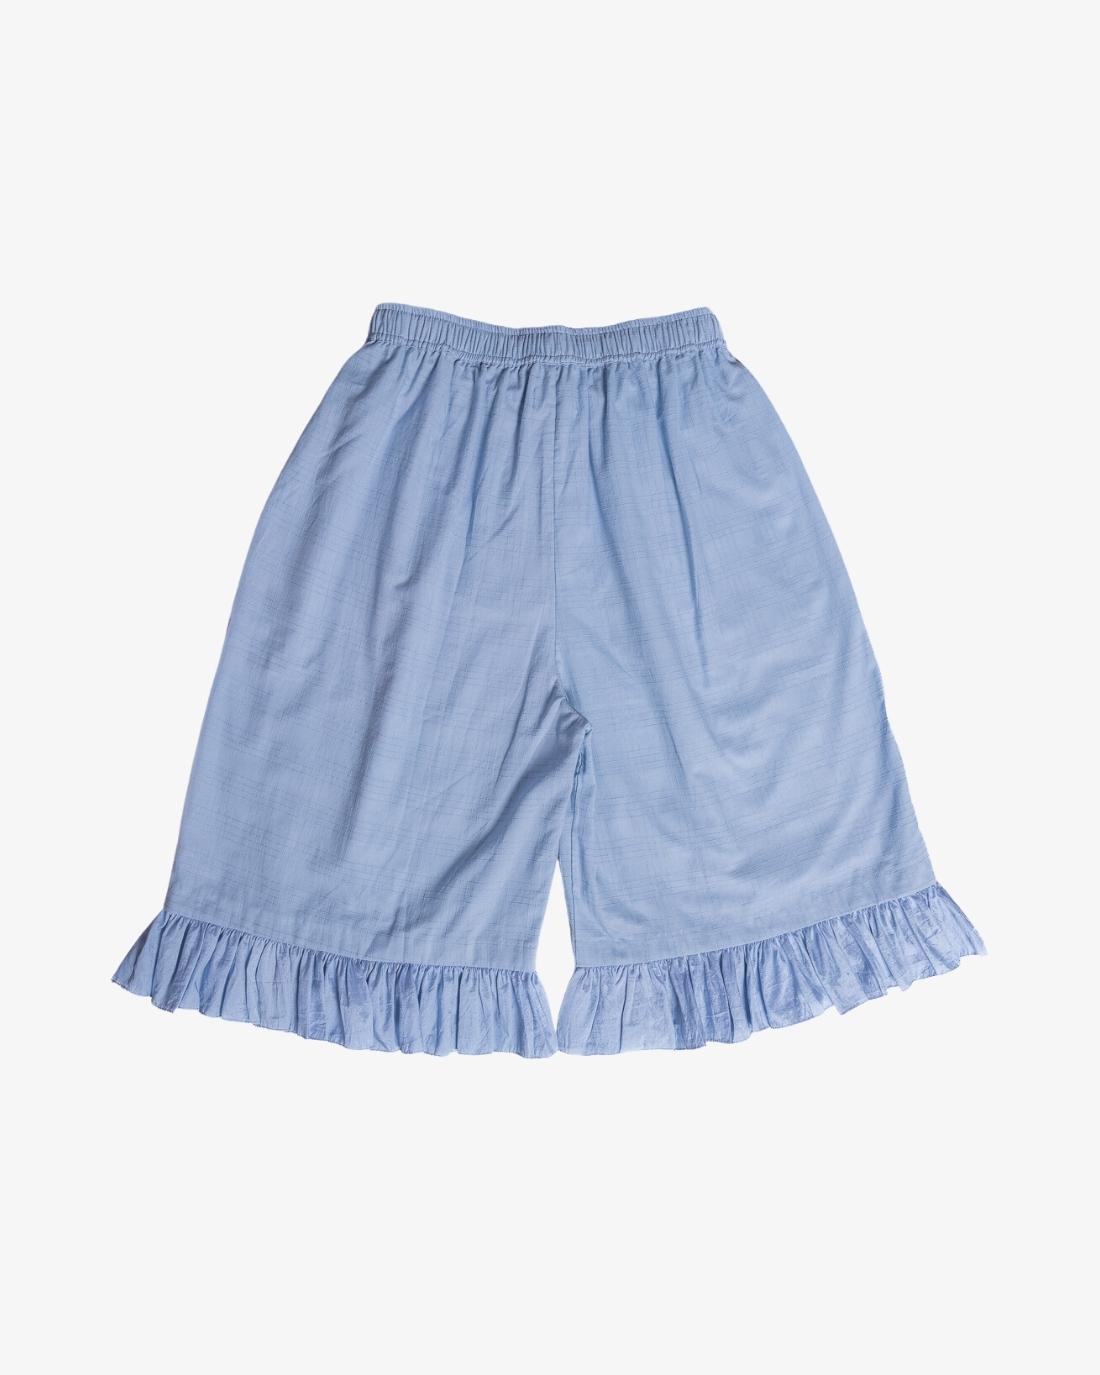 Blue Cotton Bloomers by Bunon